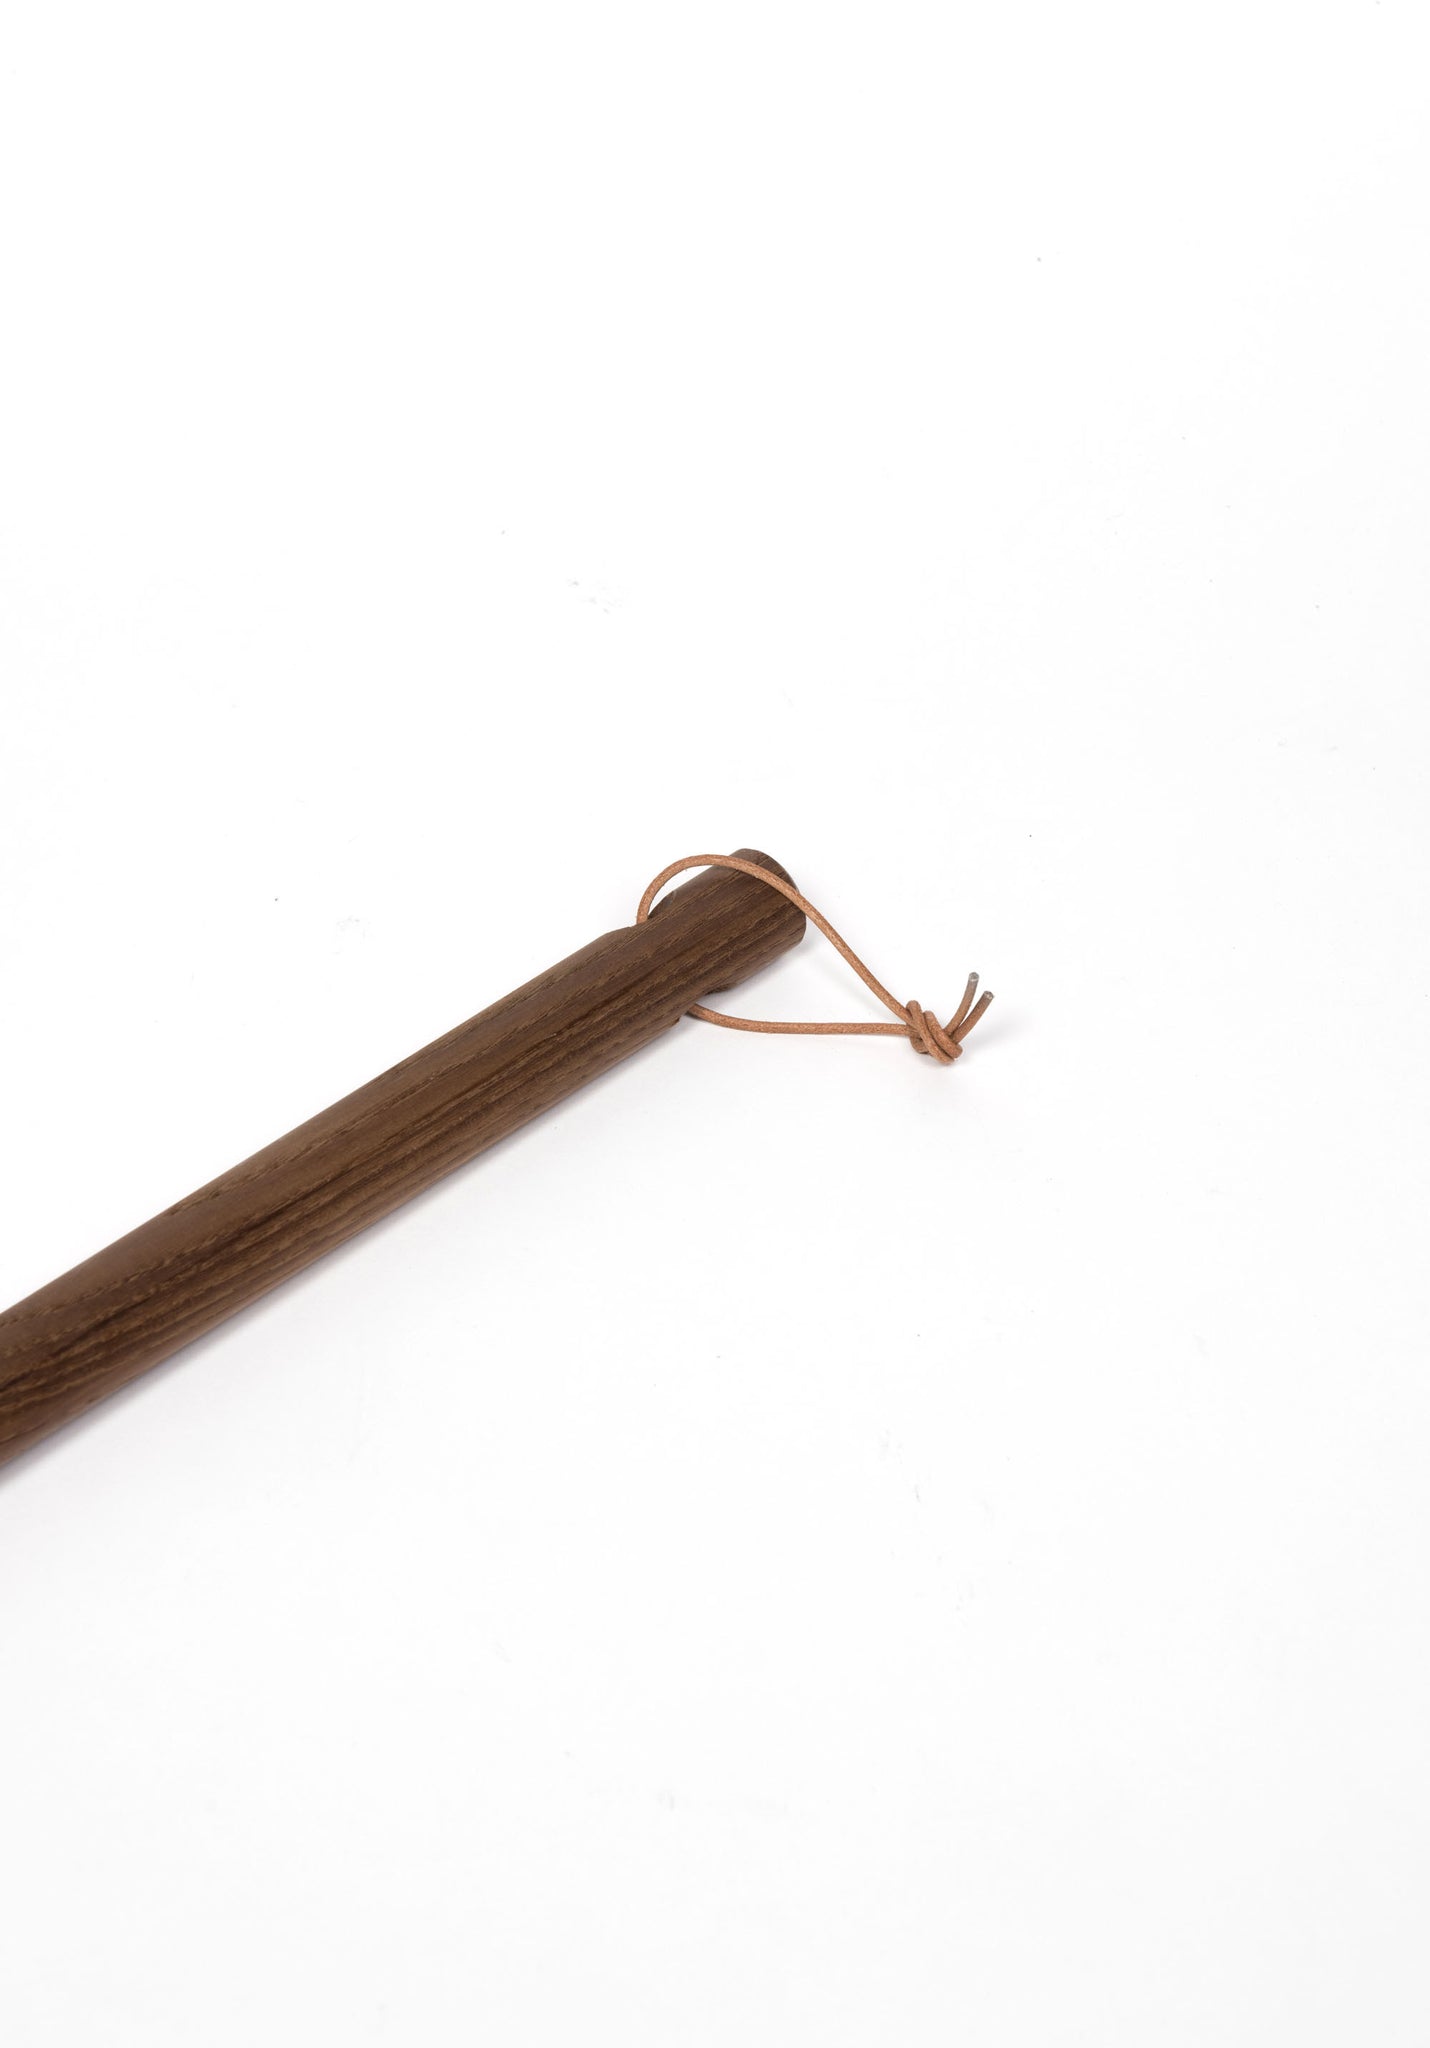 Wooden broom handle with leather loop for hanging.